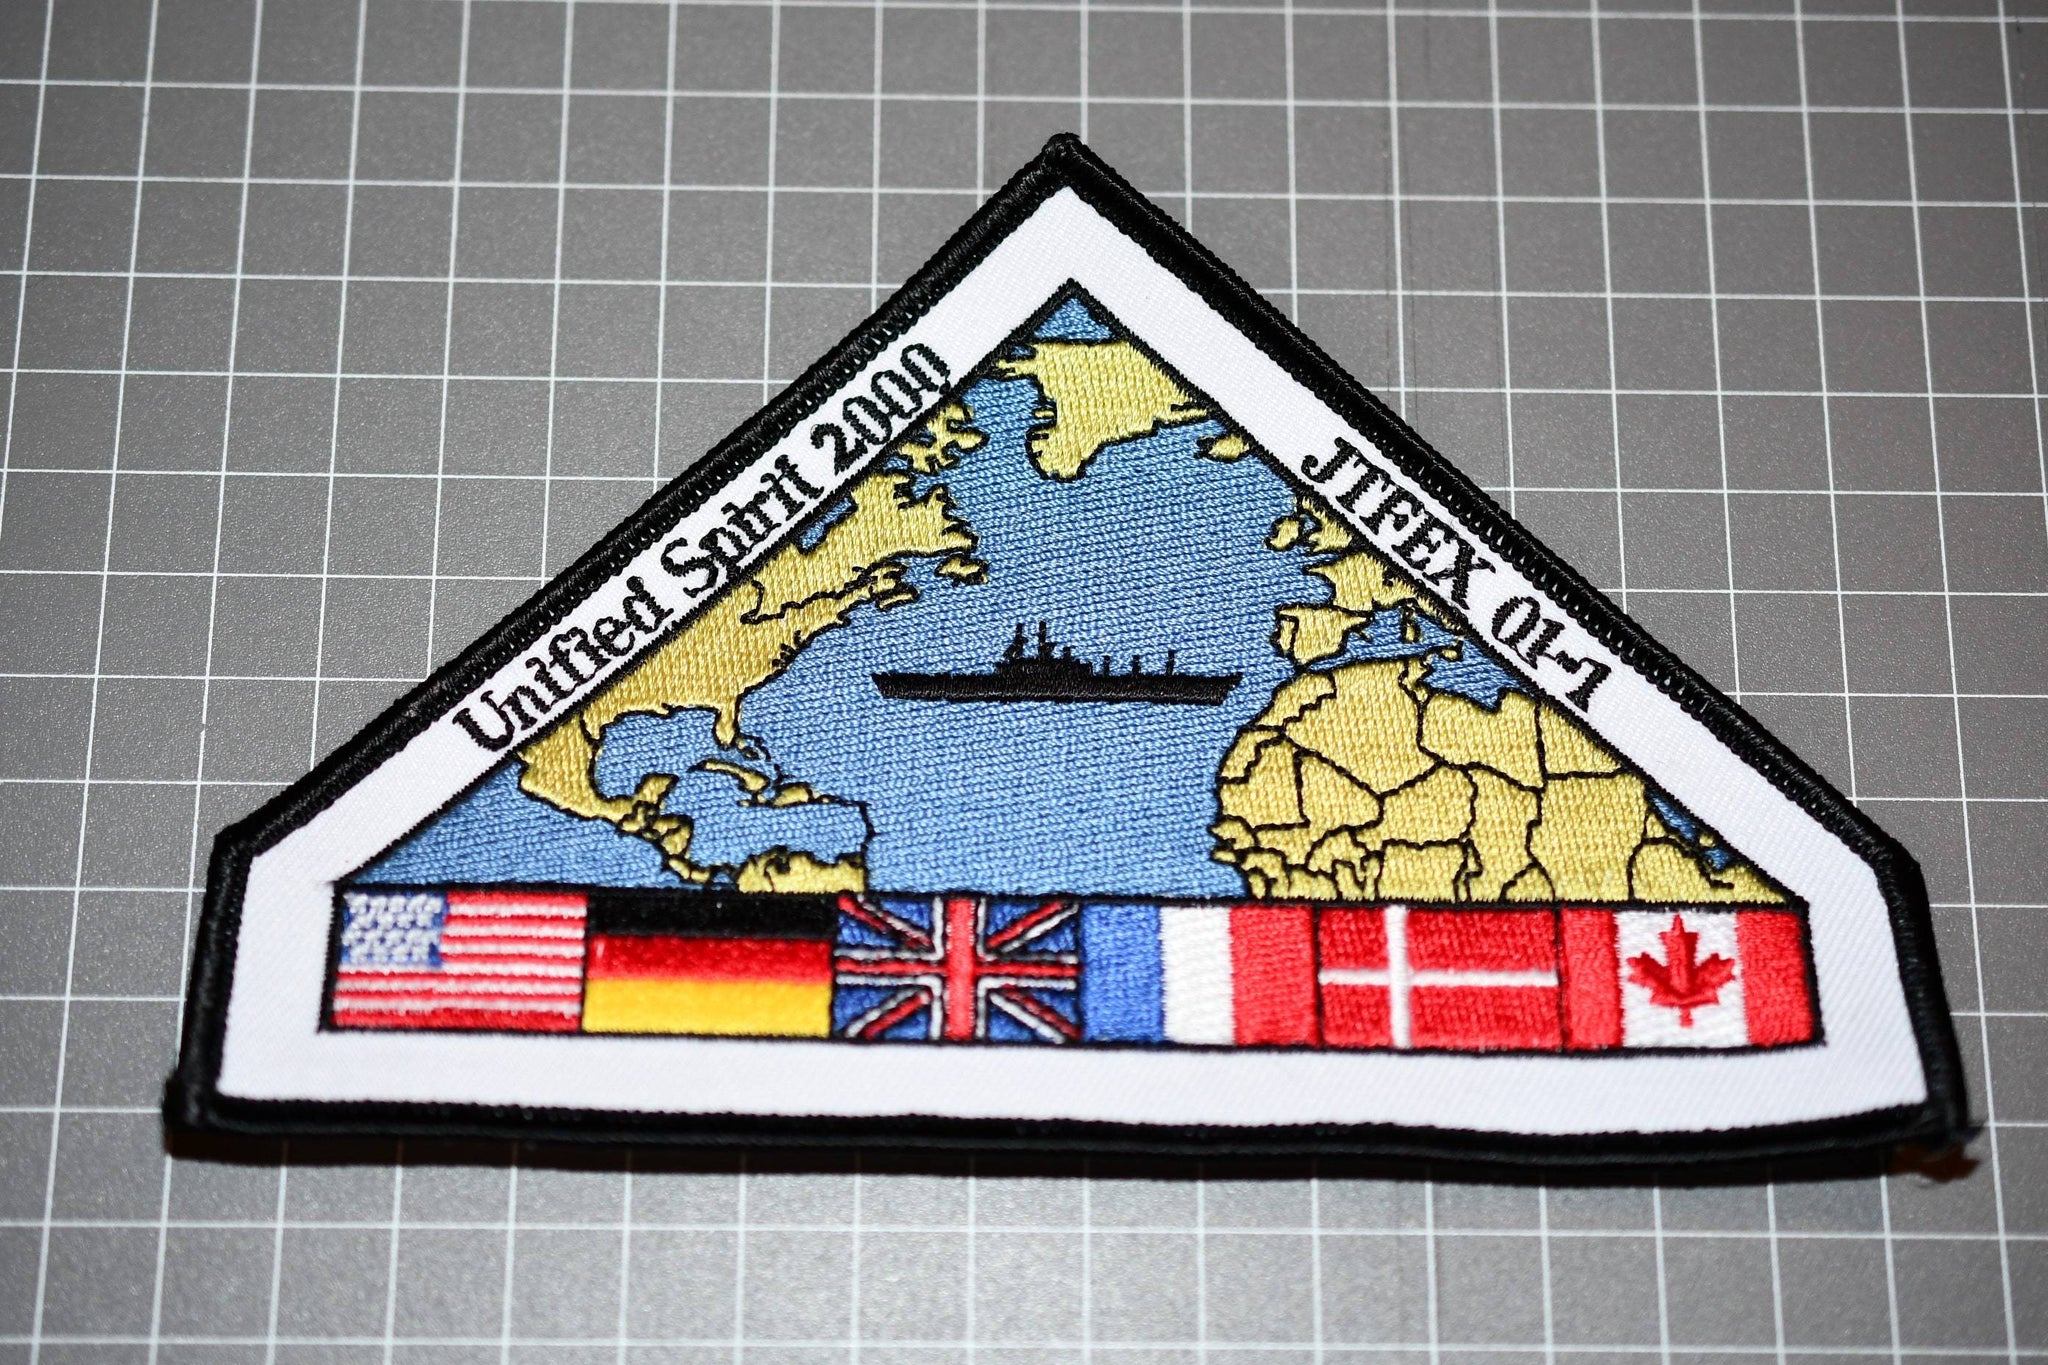 Operation Unified Spirit 2000 JTFEX 01-1 NATO Exercise Patch (B10-109)